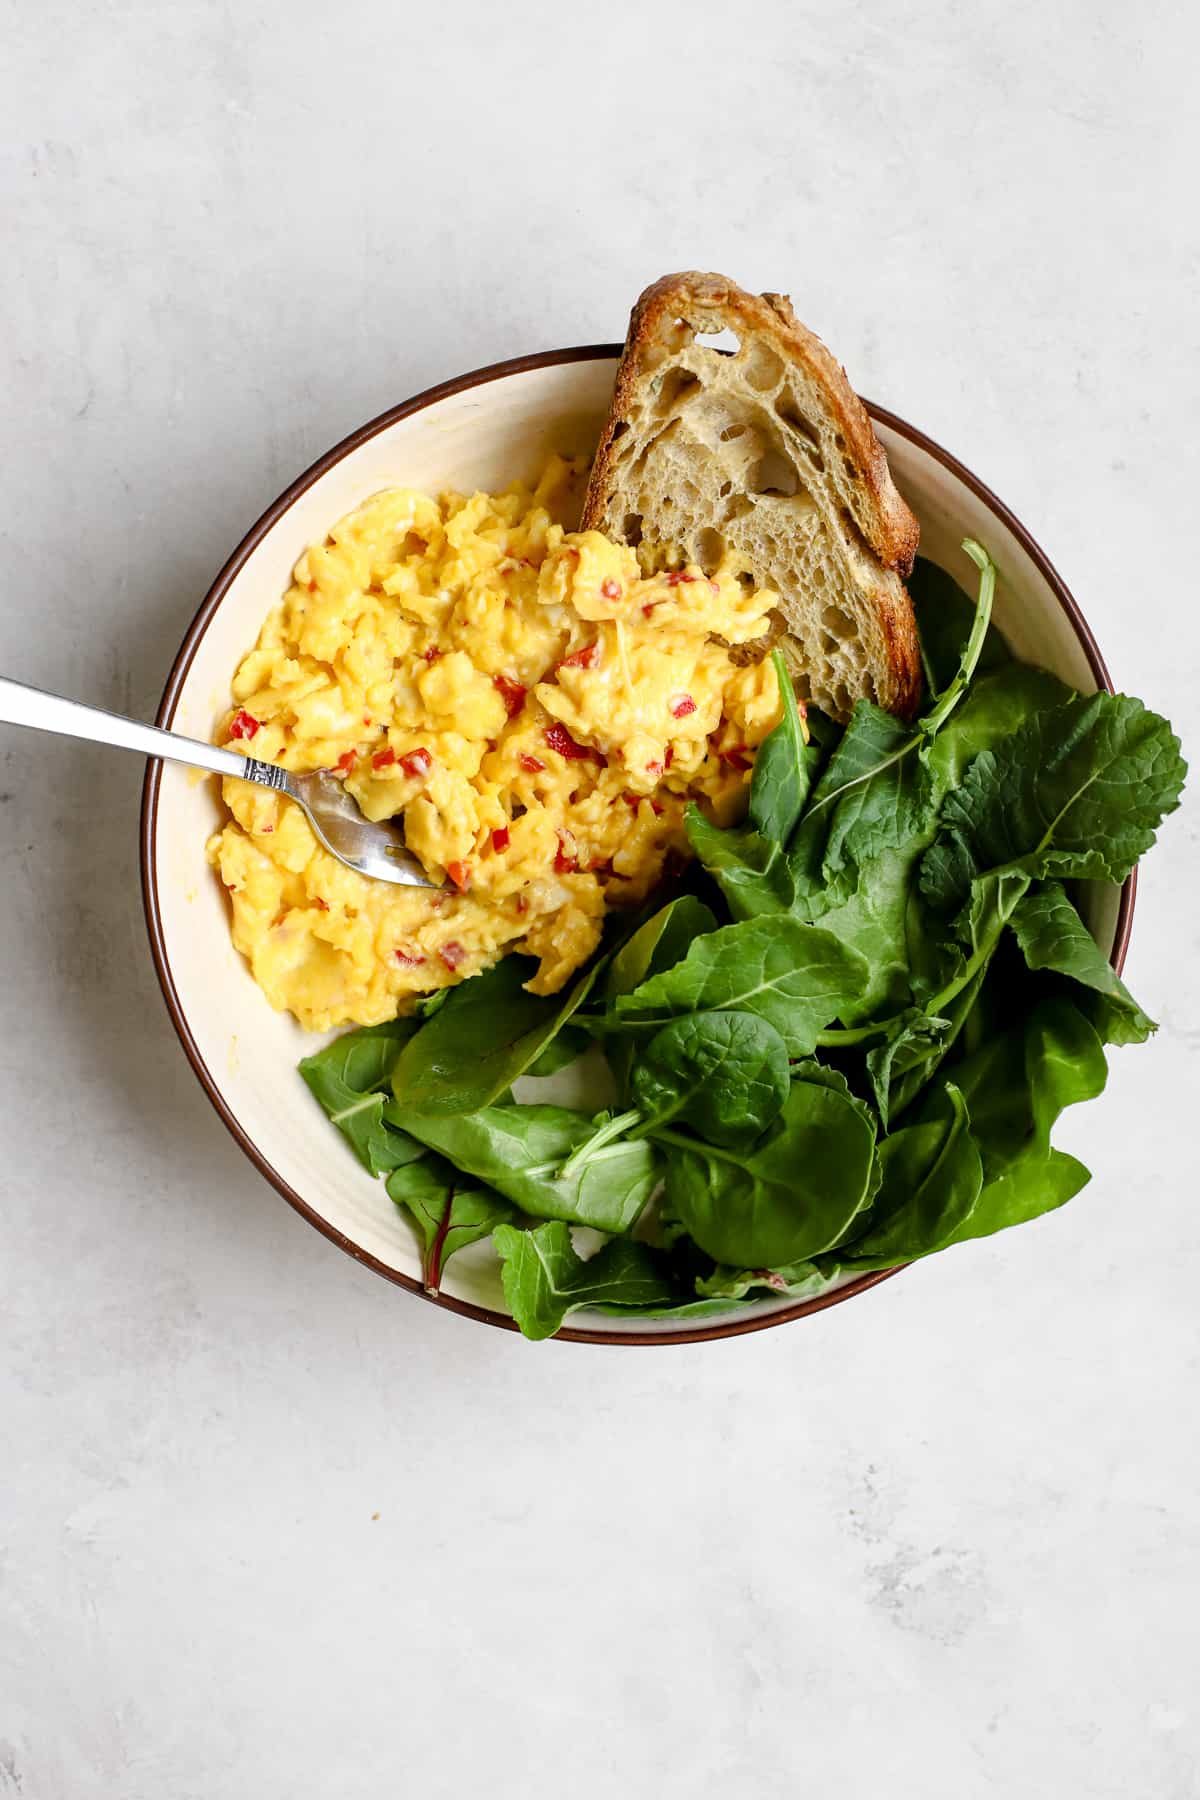 Chilli scrambled eggs in bowl with sourdough toast and greens